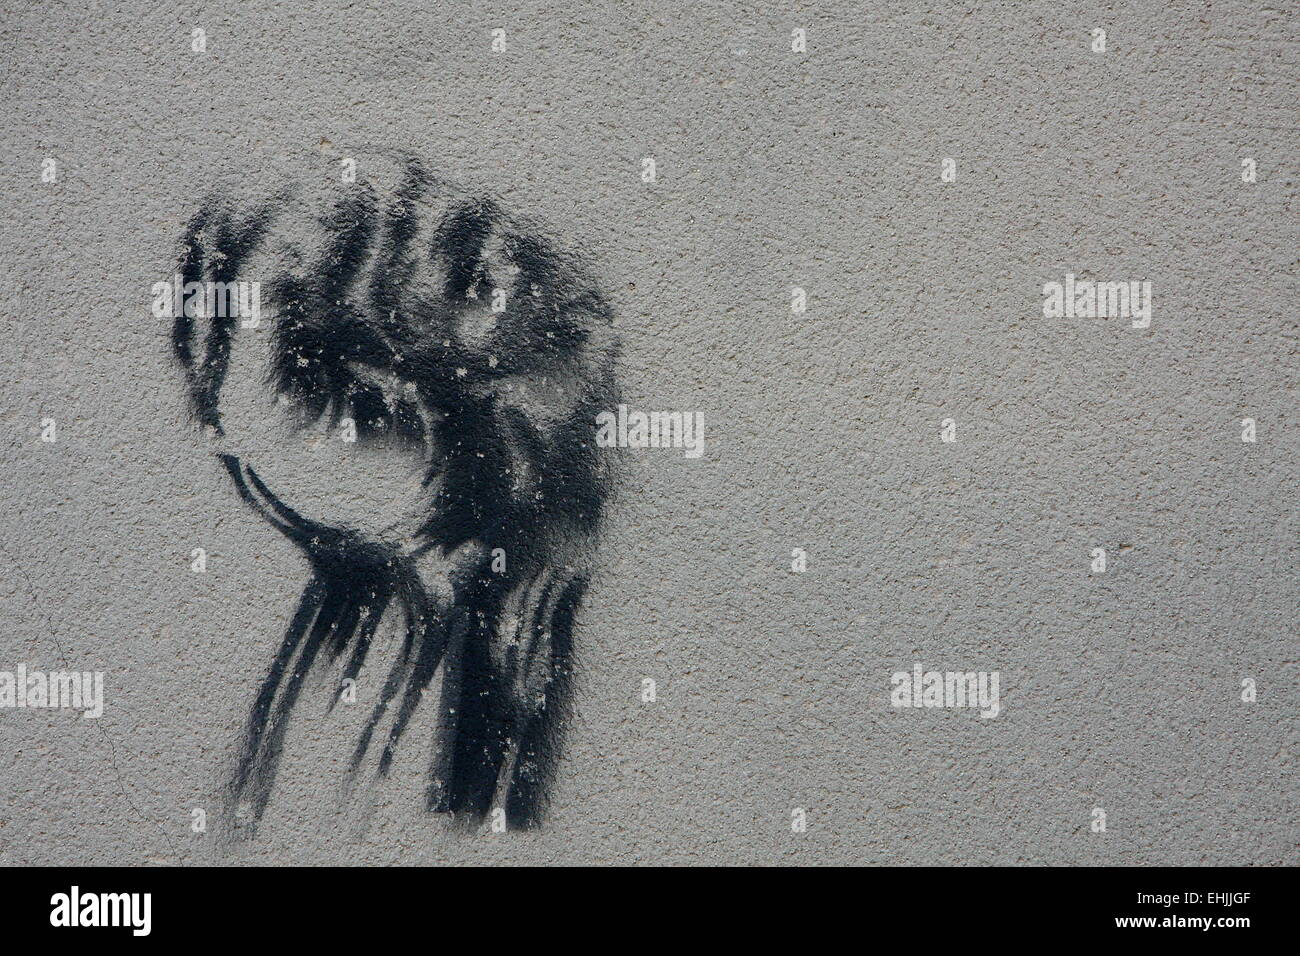 Stencil graffiti with clenched fist Stock Photo